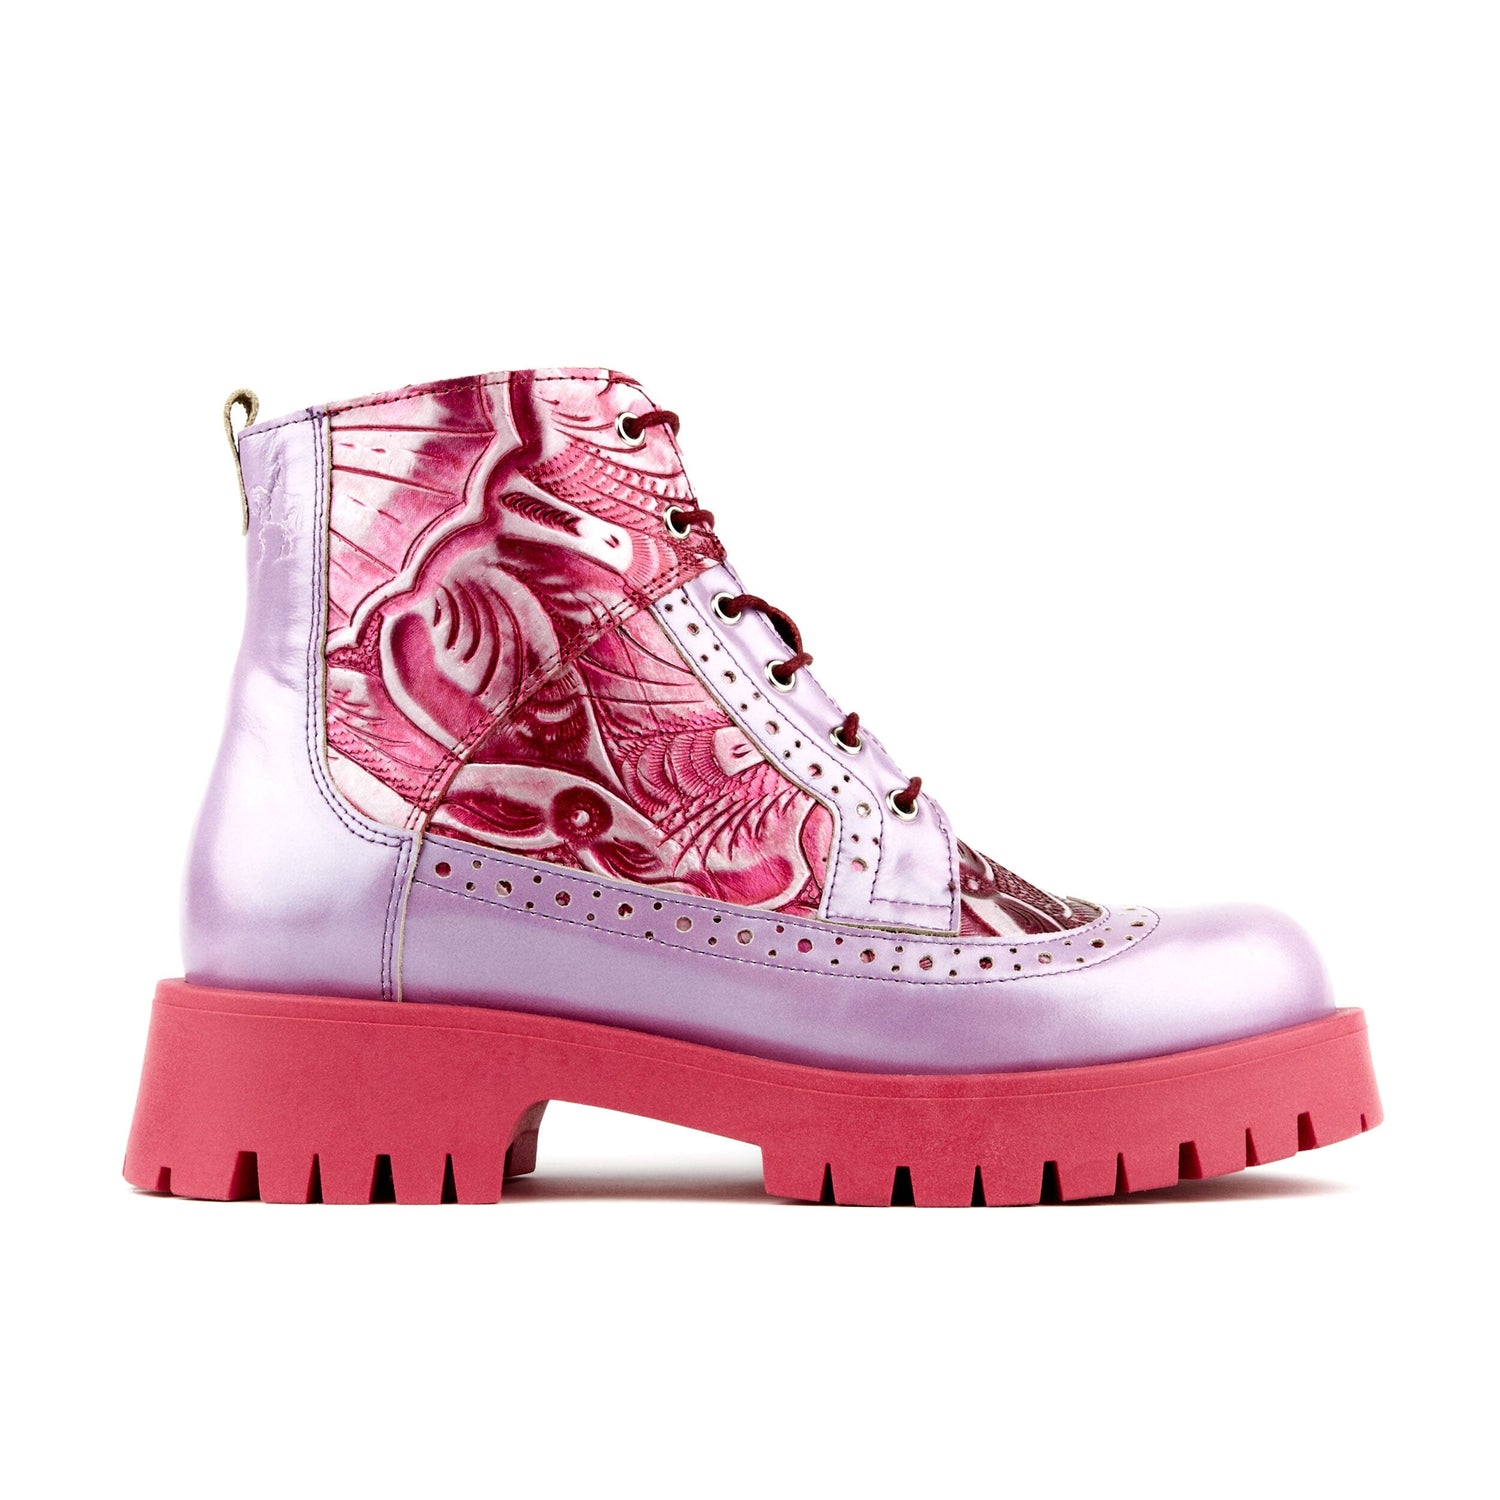 Hatter Platform - Pink & Silver & Lilac Womens Ankle Boots Embassy London 